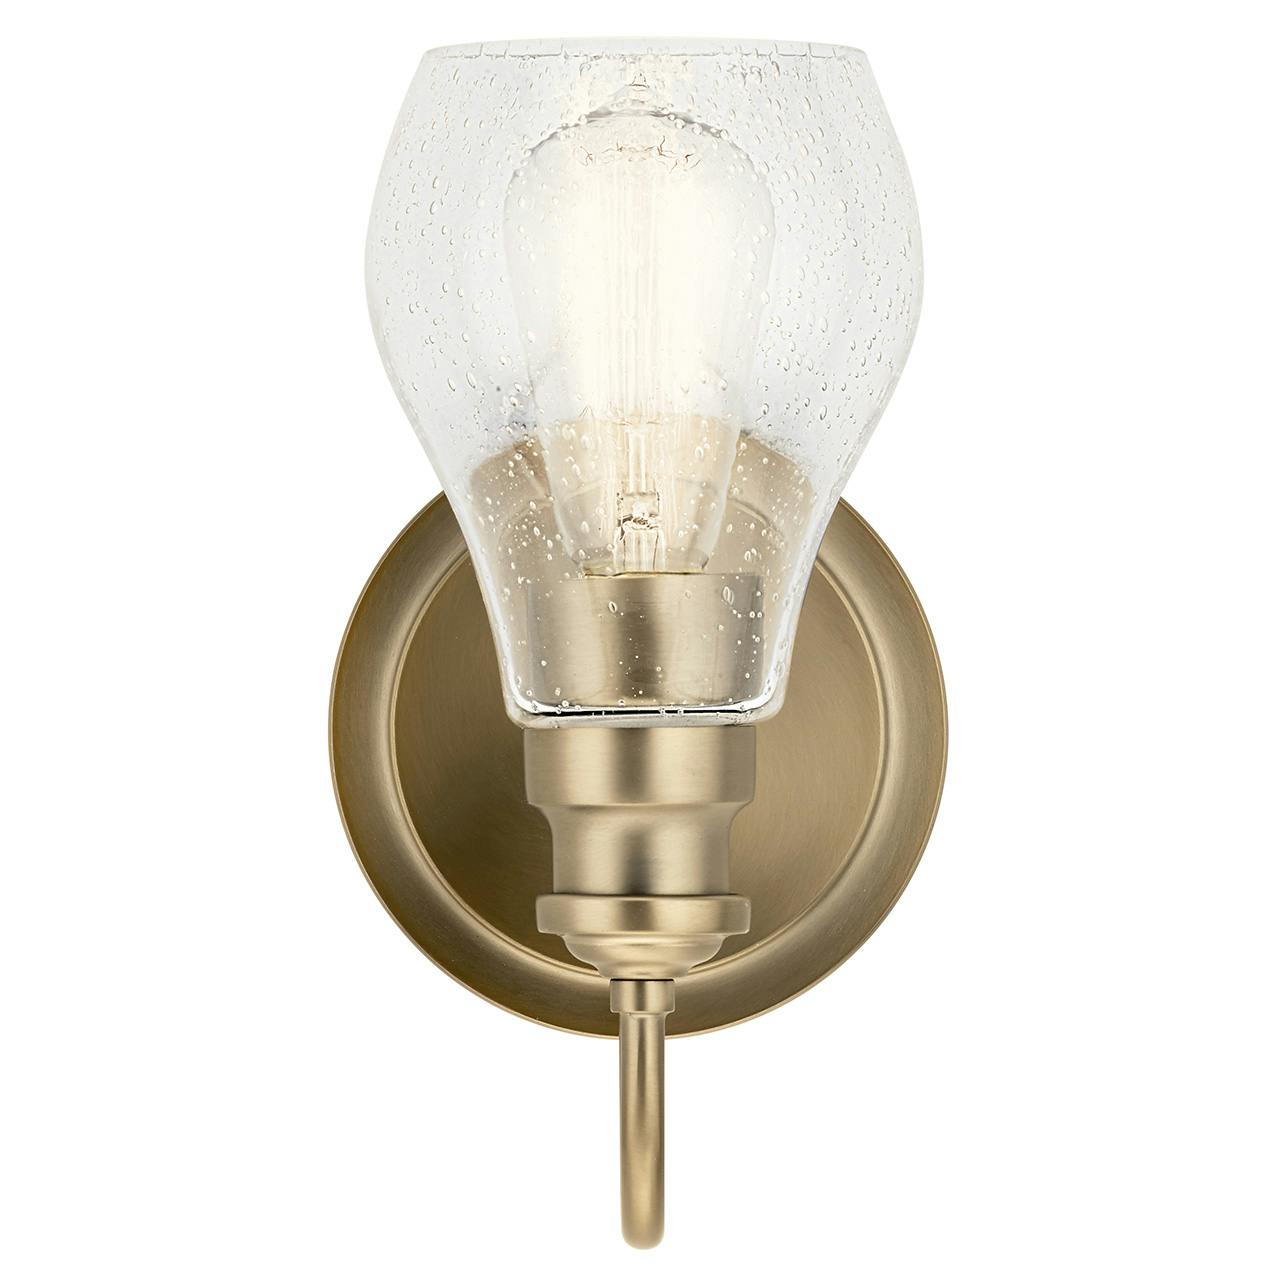 The Greenbrier 1 Light Sconce Classic Bronze facing up on a white background